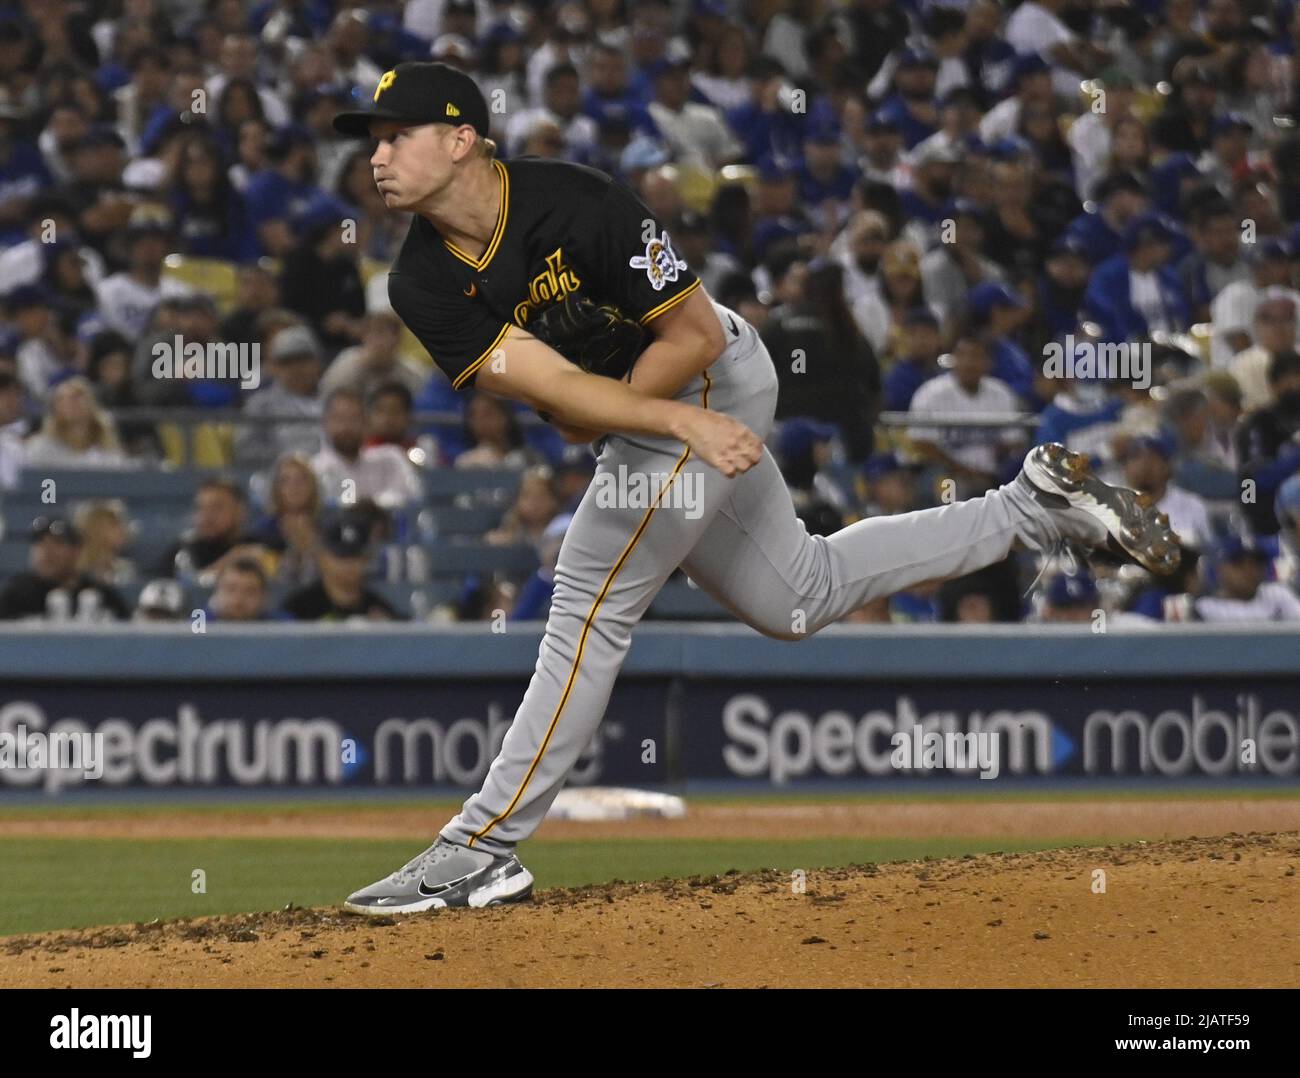 Los Angeles, United States. 01st June, 2022. Pittsburgh Pirates starting pitcher Mitch Keller delivers during the fifth inning at Dodger Stadium in Los Angeles on Tuesday, May 31, 2022. Photo by Jim Ruymen/UPI Credit: UPI/Alamy Live News Stock Photo